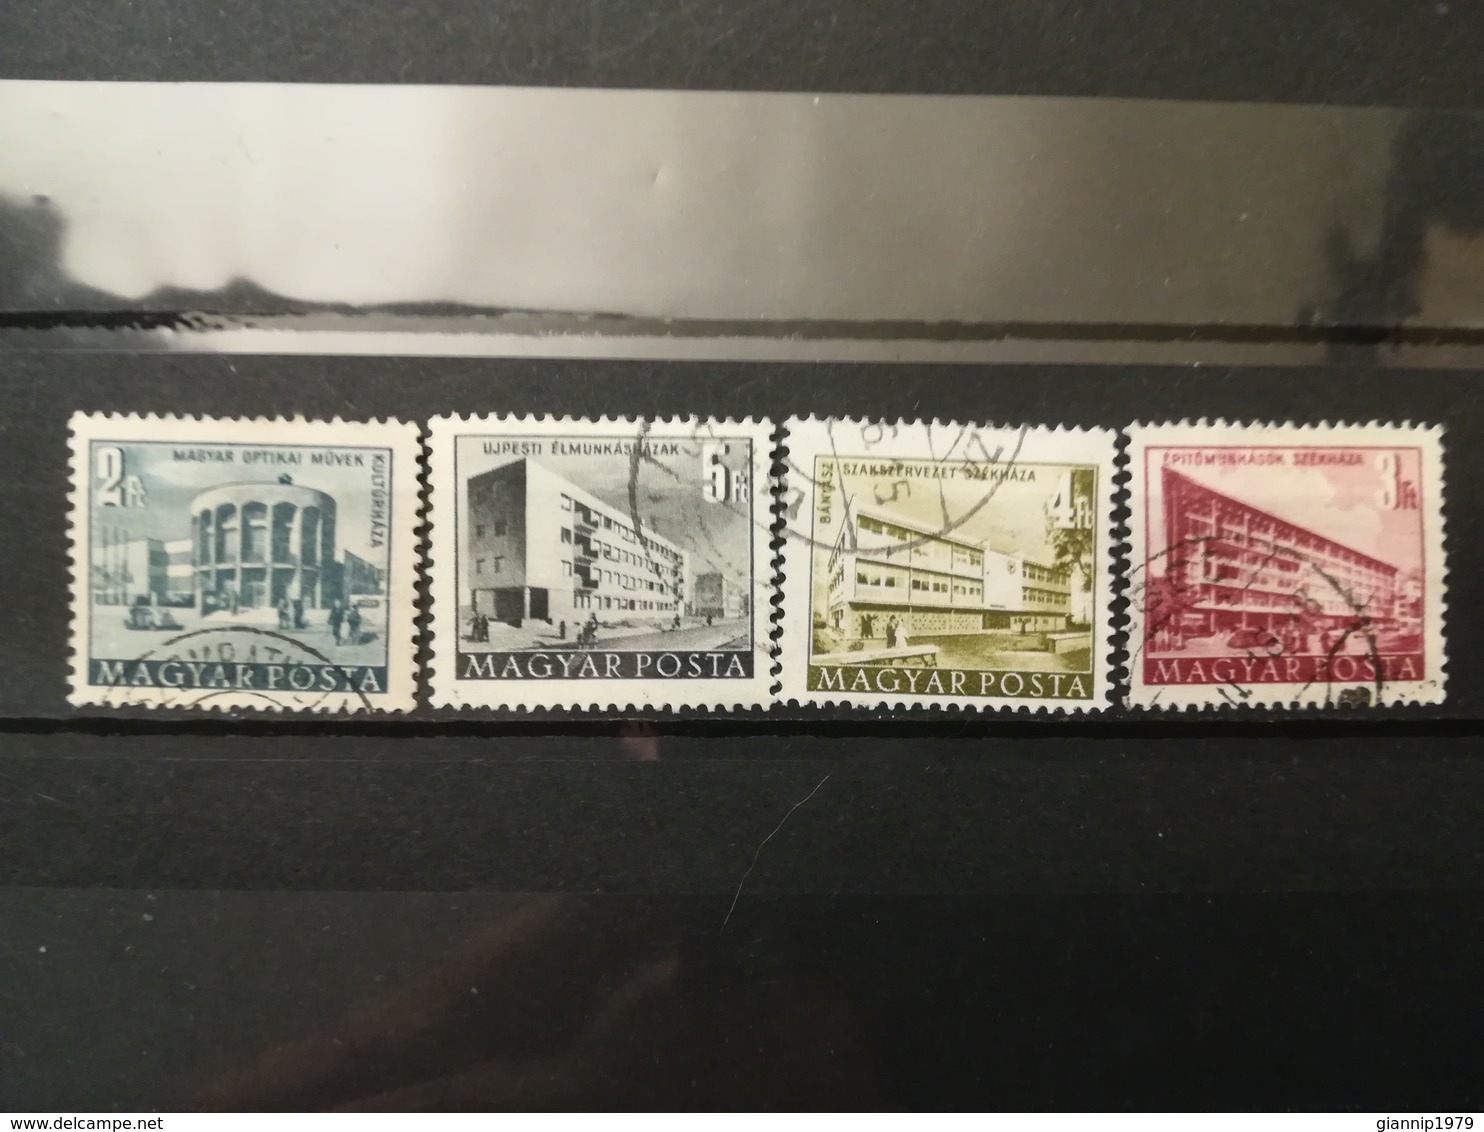 FRANCOBOLLI STAMPS UNGHERIA MAGYAR POSTA 1950 - 1953 USED  PLAN FIVE PIANO QUINQUENNALE HUNGARY - Usado